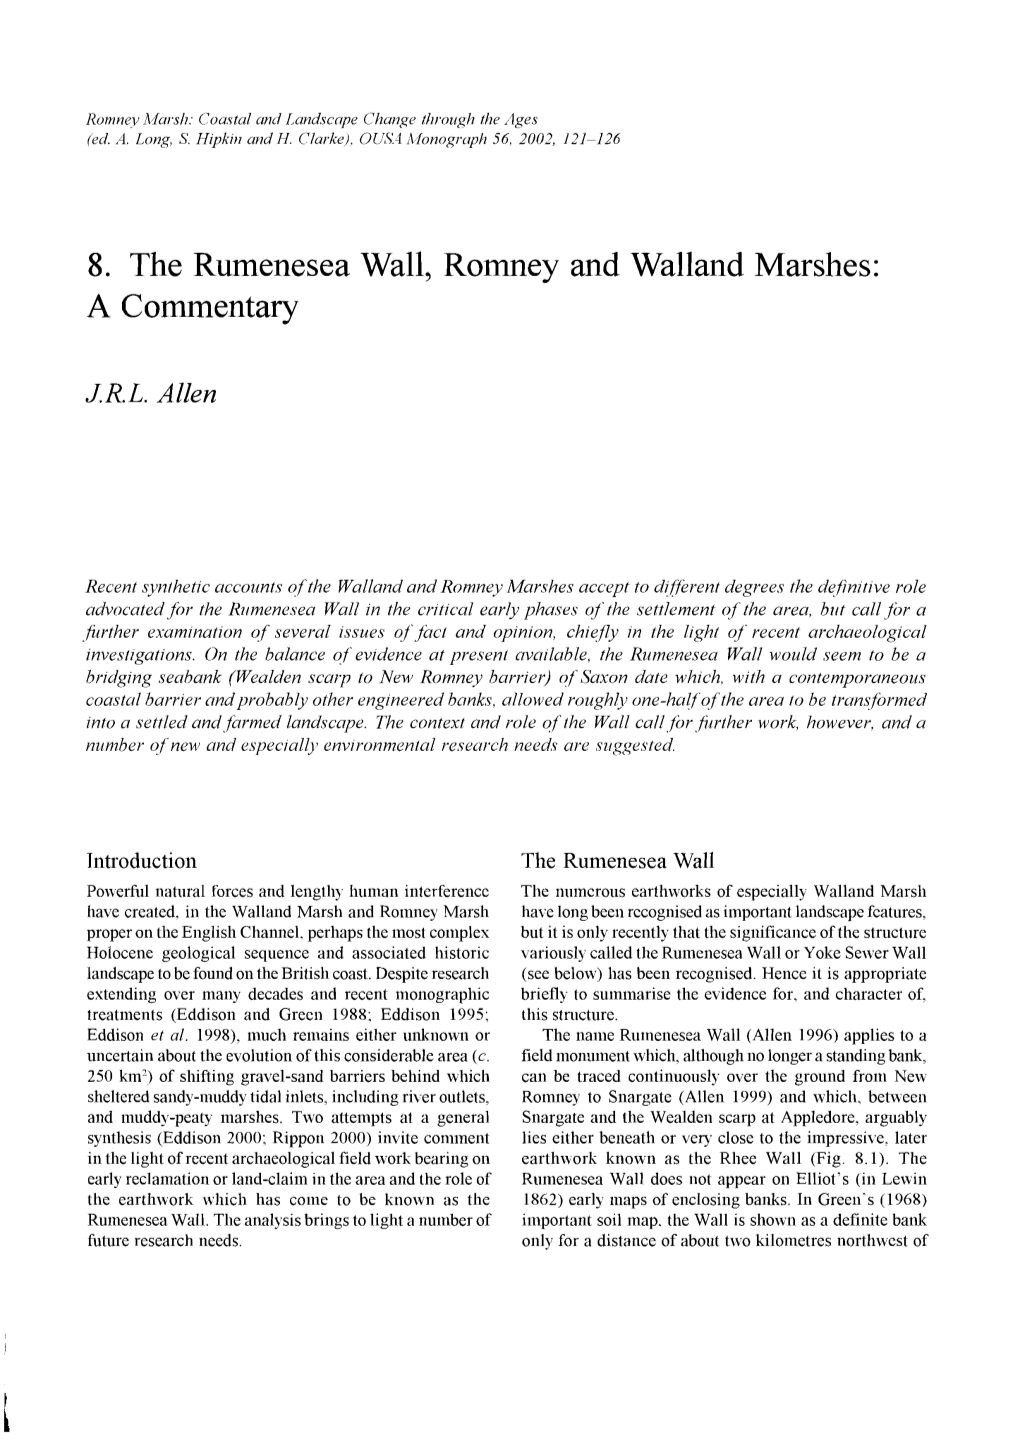 8. the Rumenesea Wall, Romney and Walland Marshes: a Commentary